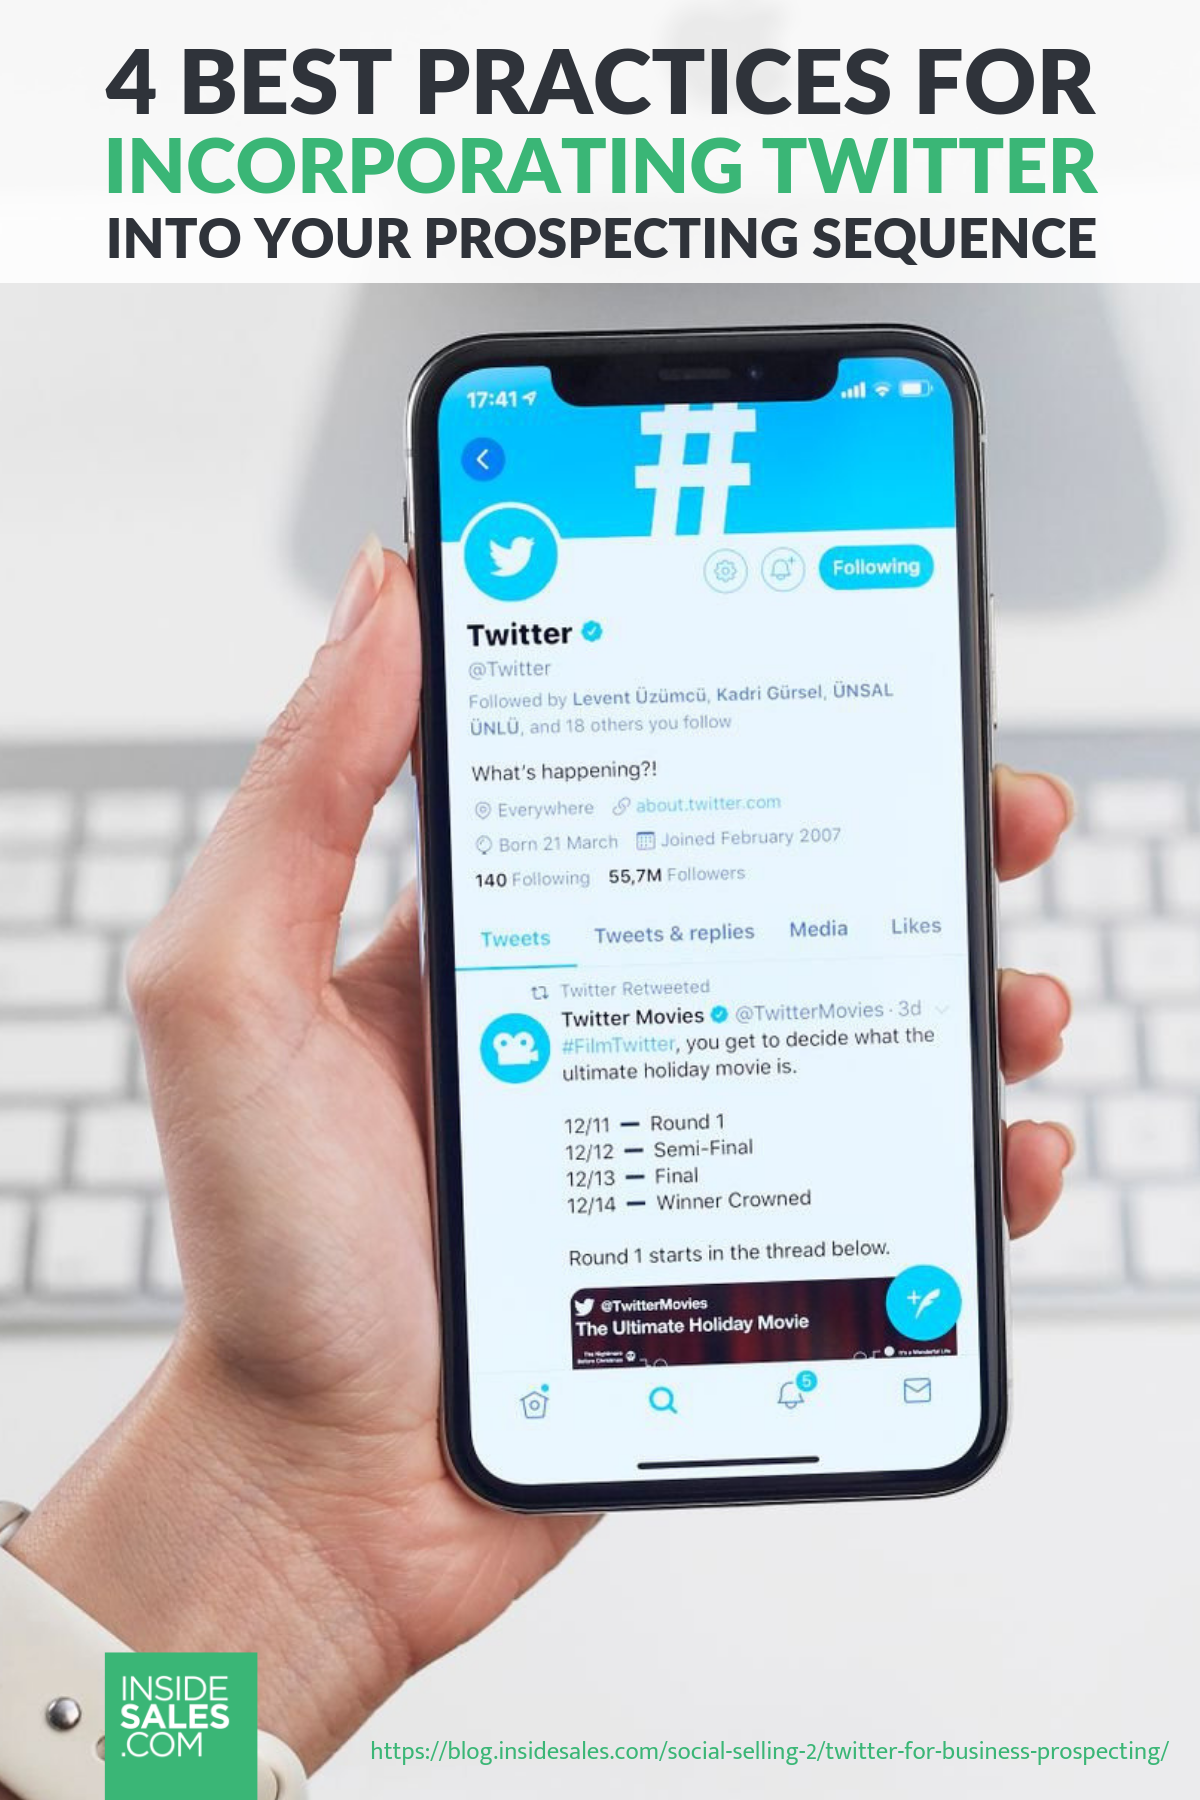 4 Best Practices For Incorporating Twitter Into Your Prospecting Sequence https://resources.insidesales.com/blog/social-selling-2/twitter-for-business-prospecting/